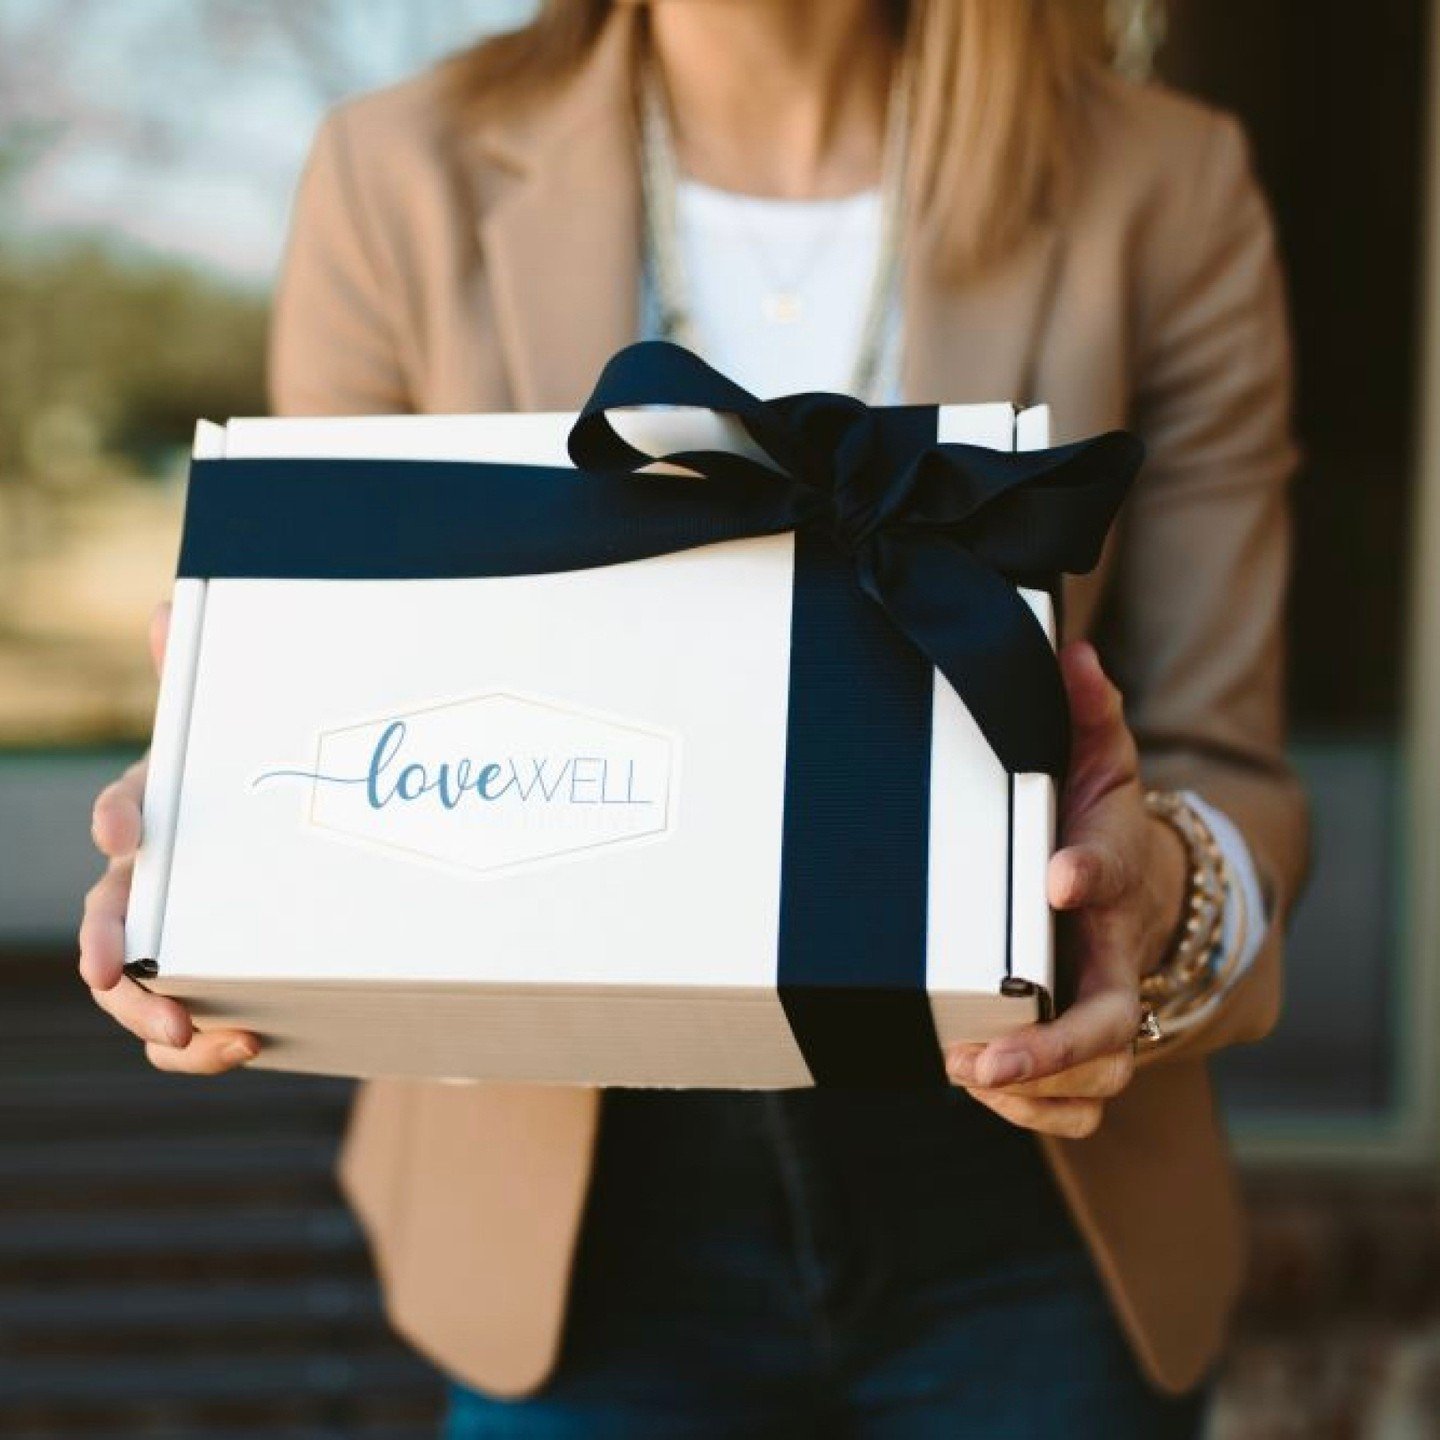 Wondering why it matters to send a gift of some kind to a grieving friend? 💔

Sending a tangible gift can be a powerful way to let your friend know that you're thinking about them and that you care. It doesn't have to be anything big or expensive - 